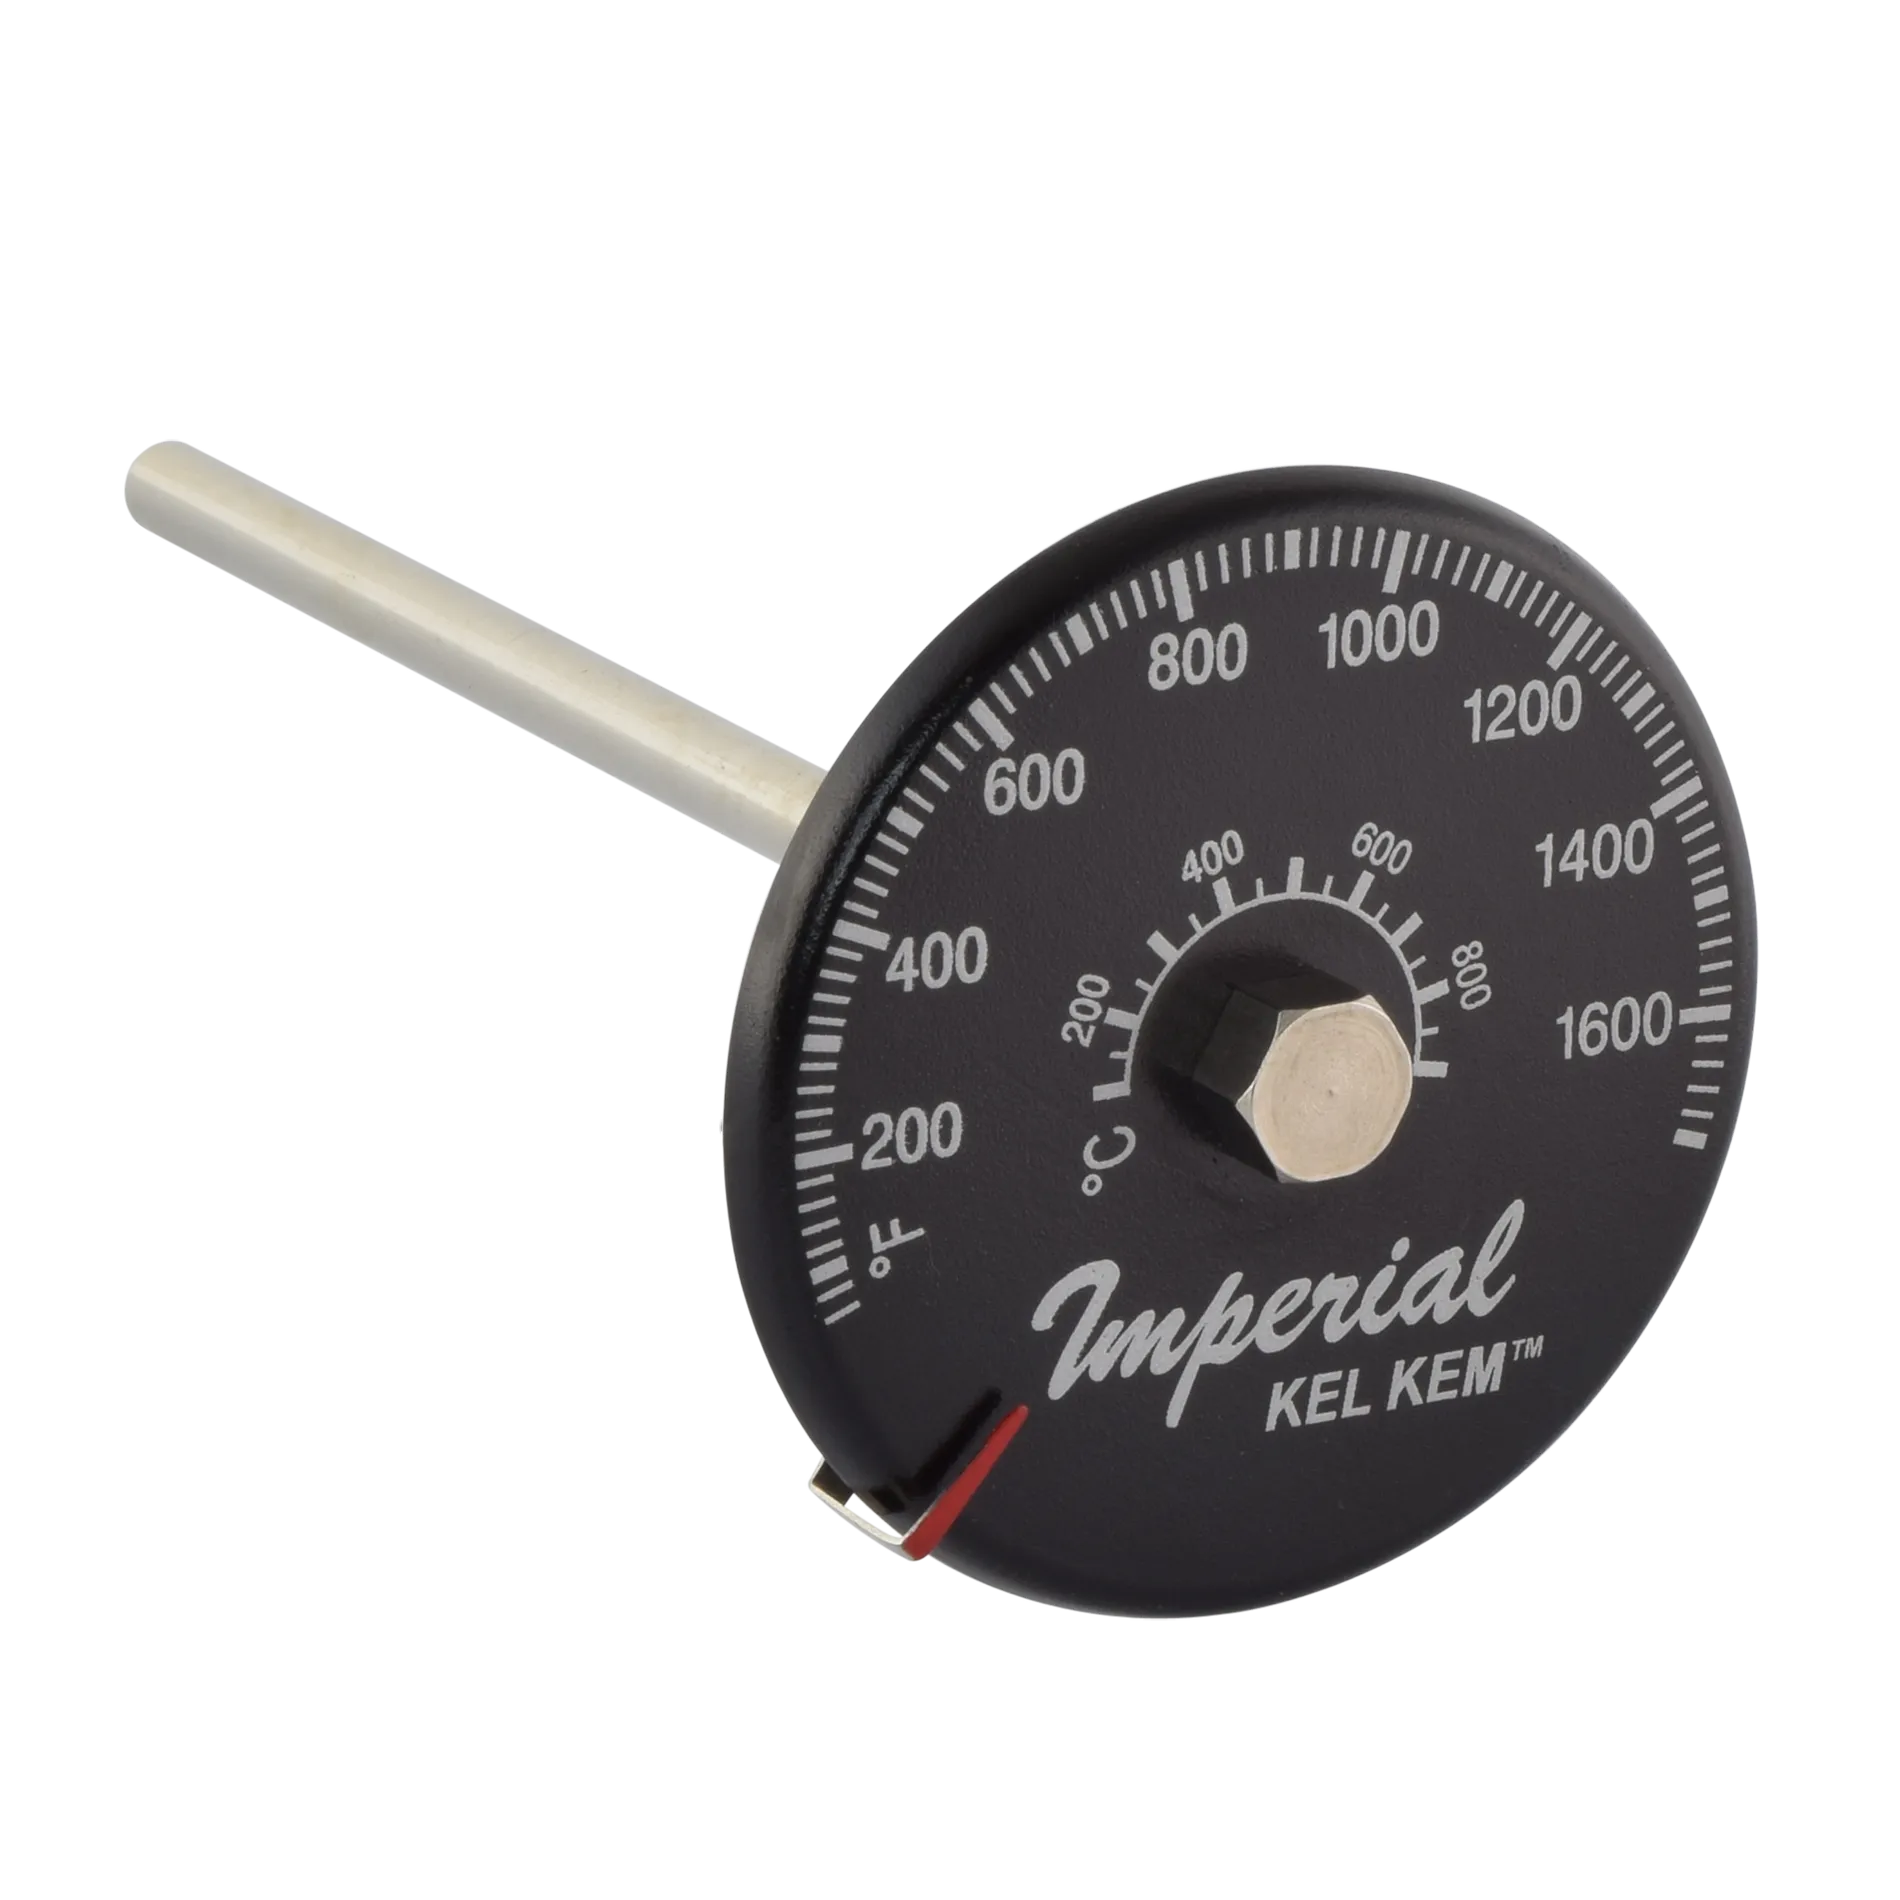 NEW IMPERIAL STOVEPIPE THERMOMETER Woodstove/ fireplace Burn Indicator  #BM0135